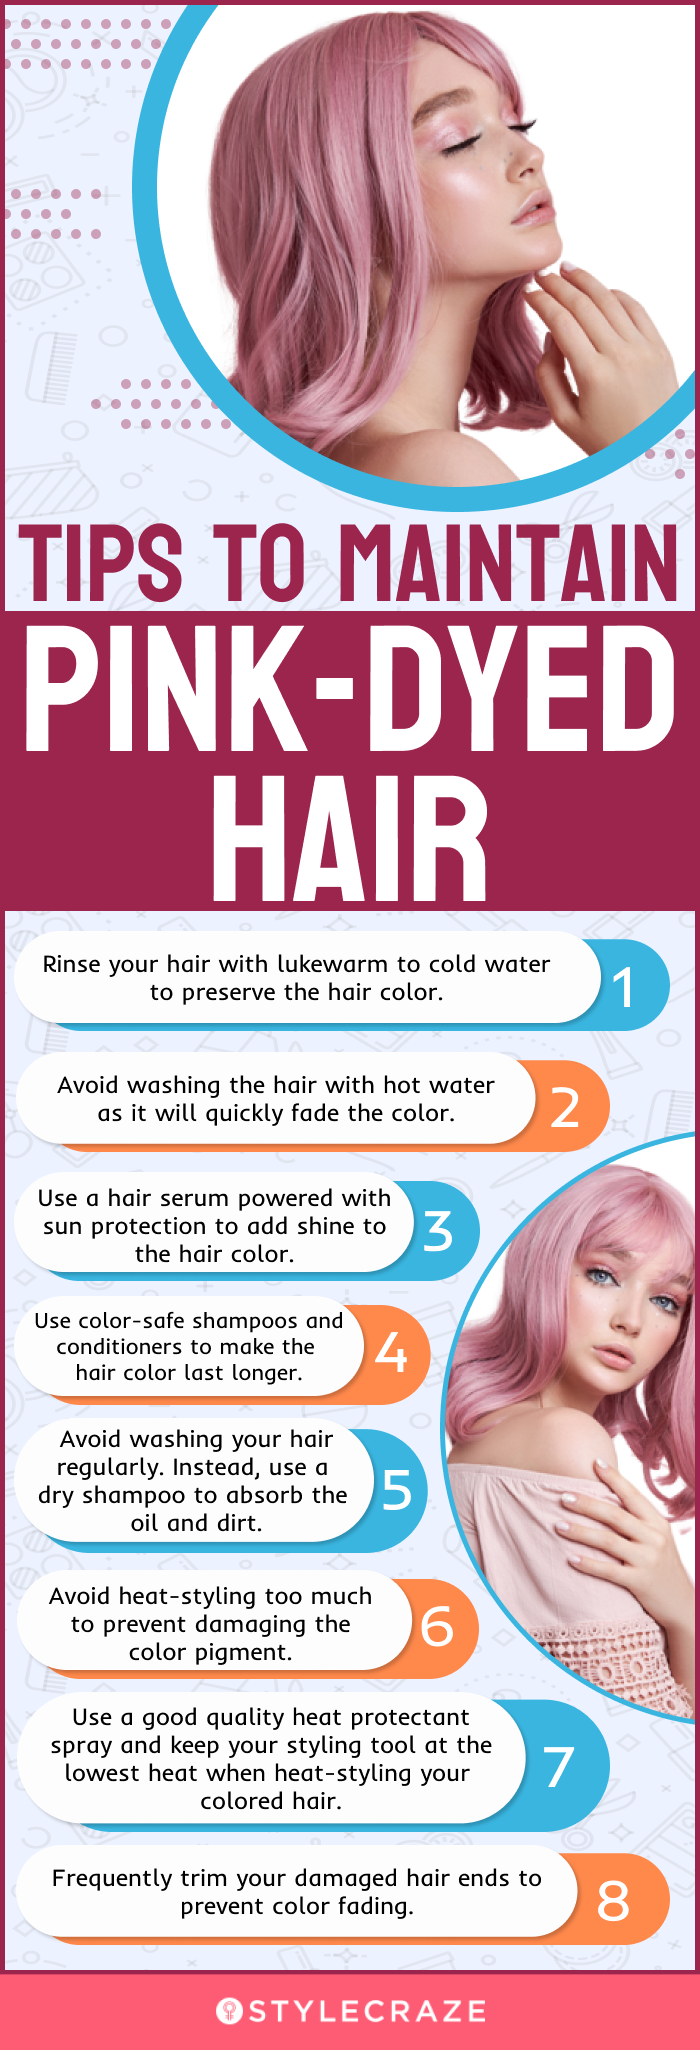 Tips To Maintain Pink-Dyed Hair